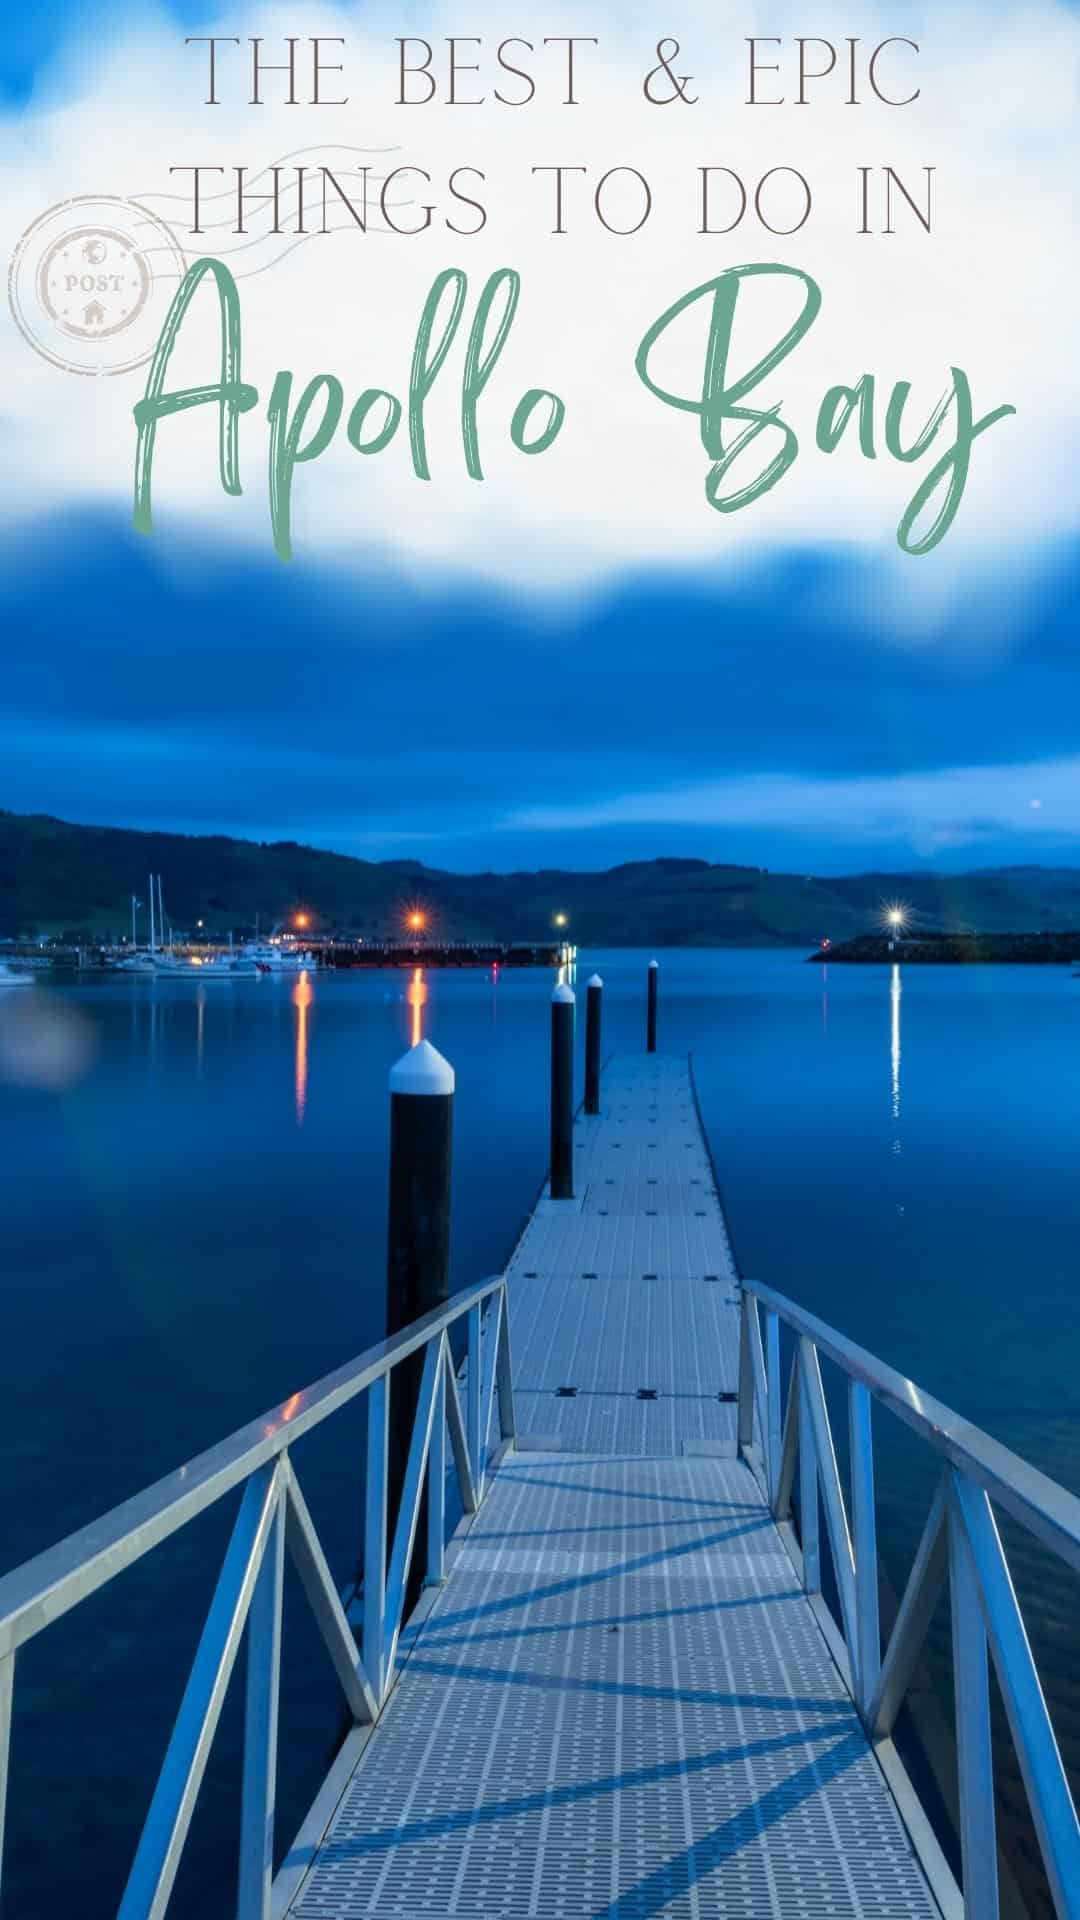 The Best & Unique Things To Do In Apollo Bay